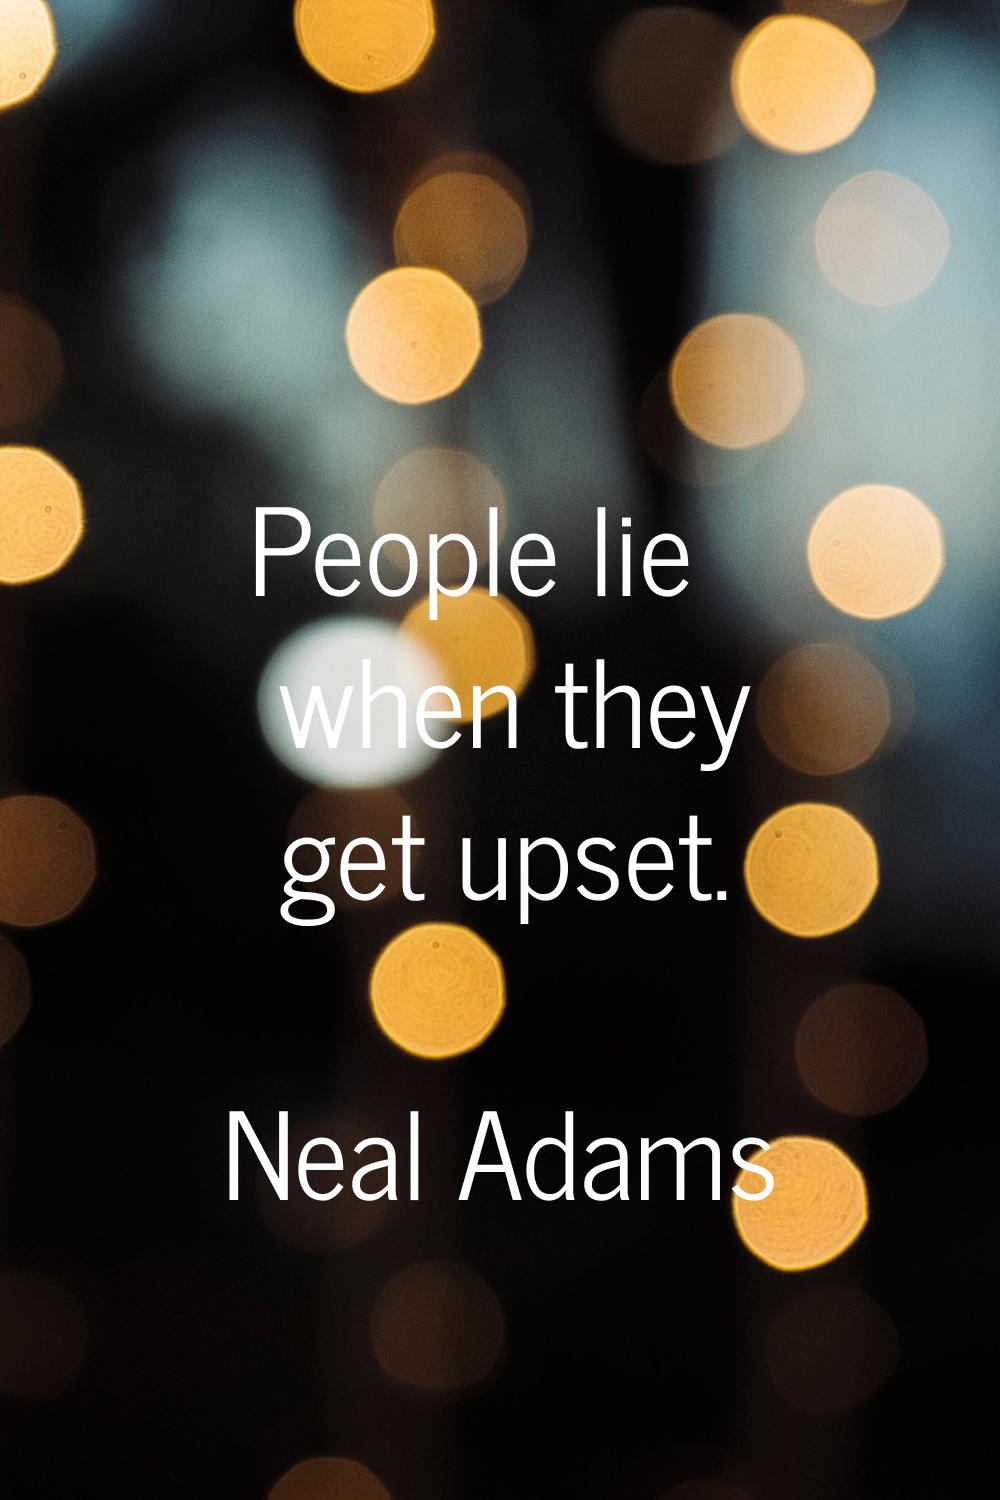 People lie when they get upset.